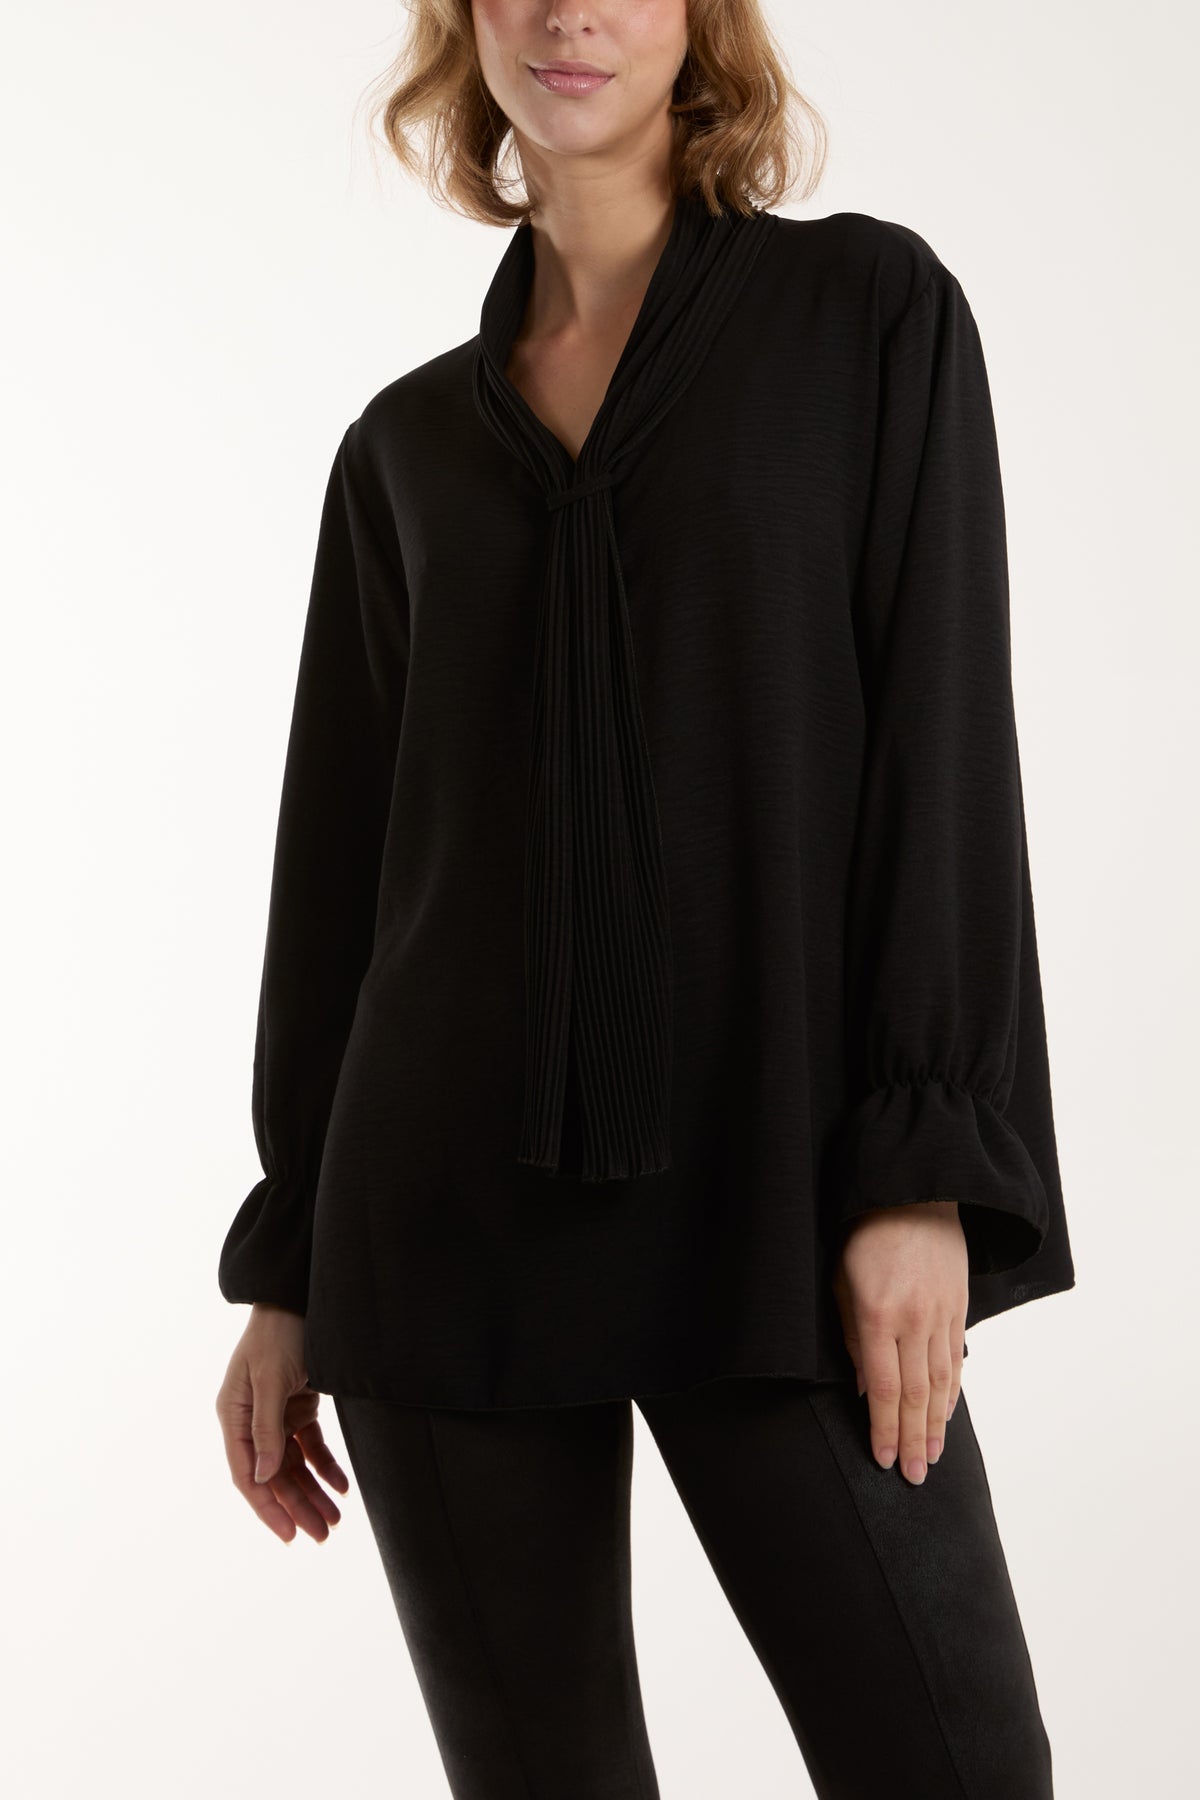 Pleated Tie Neck Bell Sleeve Blouse